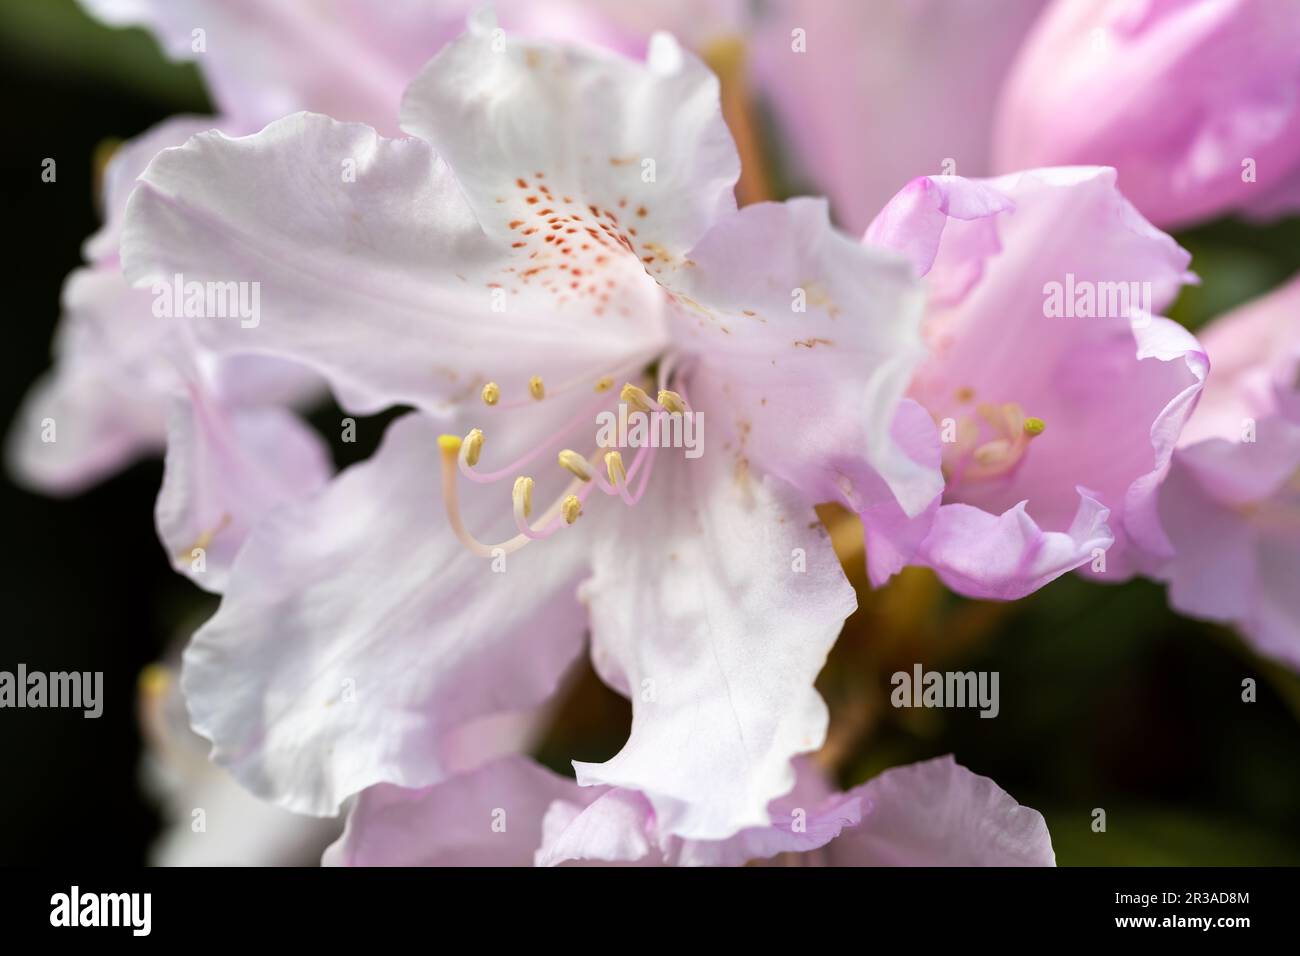 Closeup of pink and white Rhododendron flower petals. Stock Photo